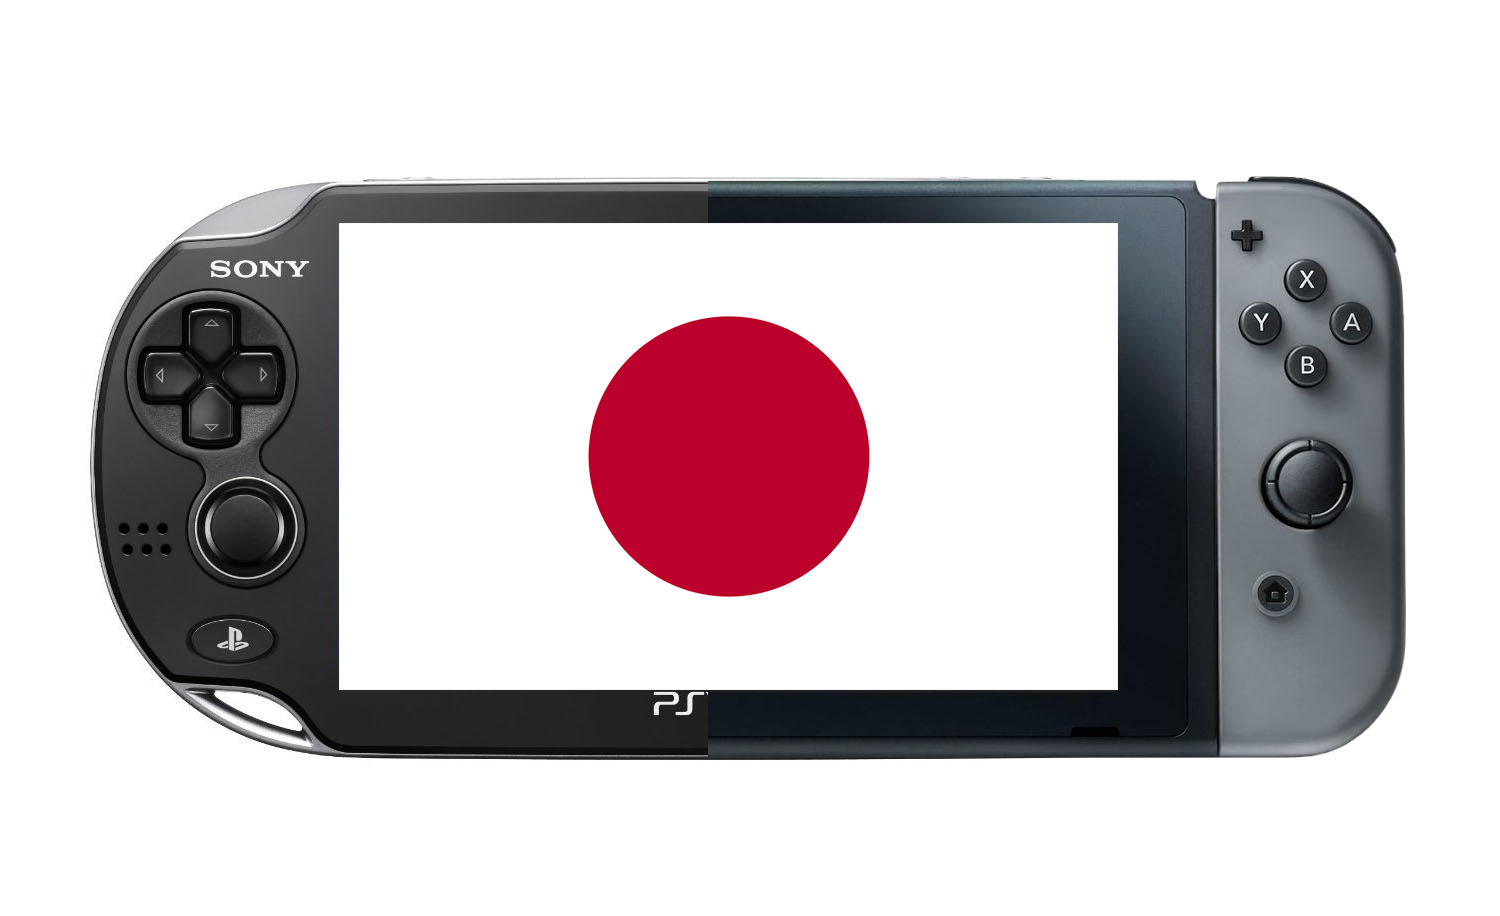 where to buy nintendo switch in japan